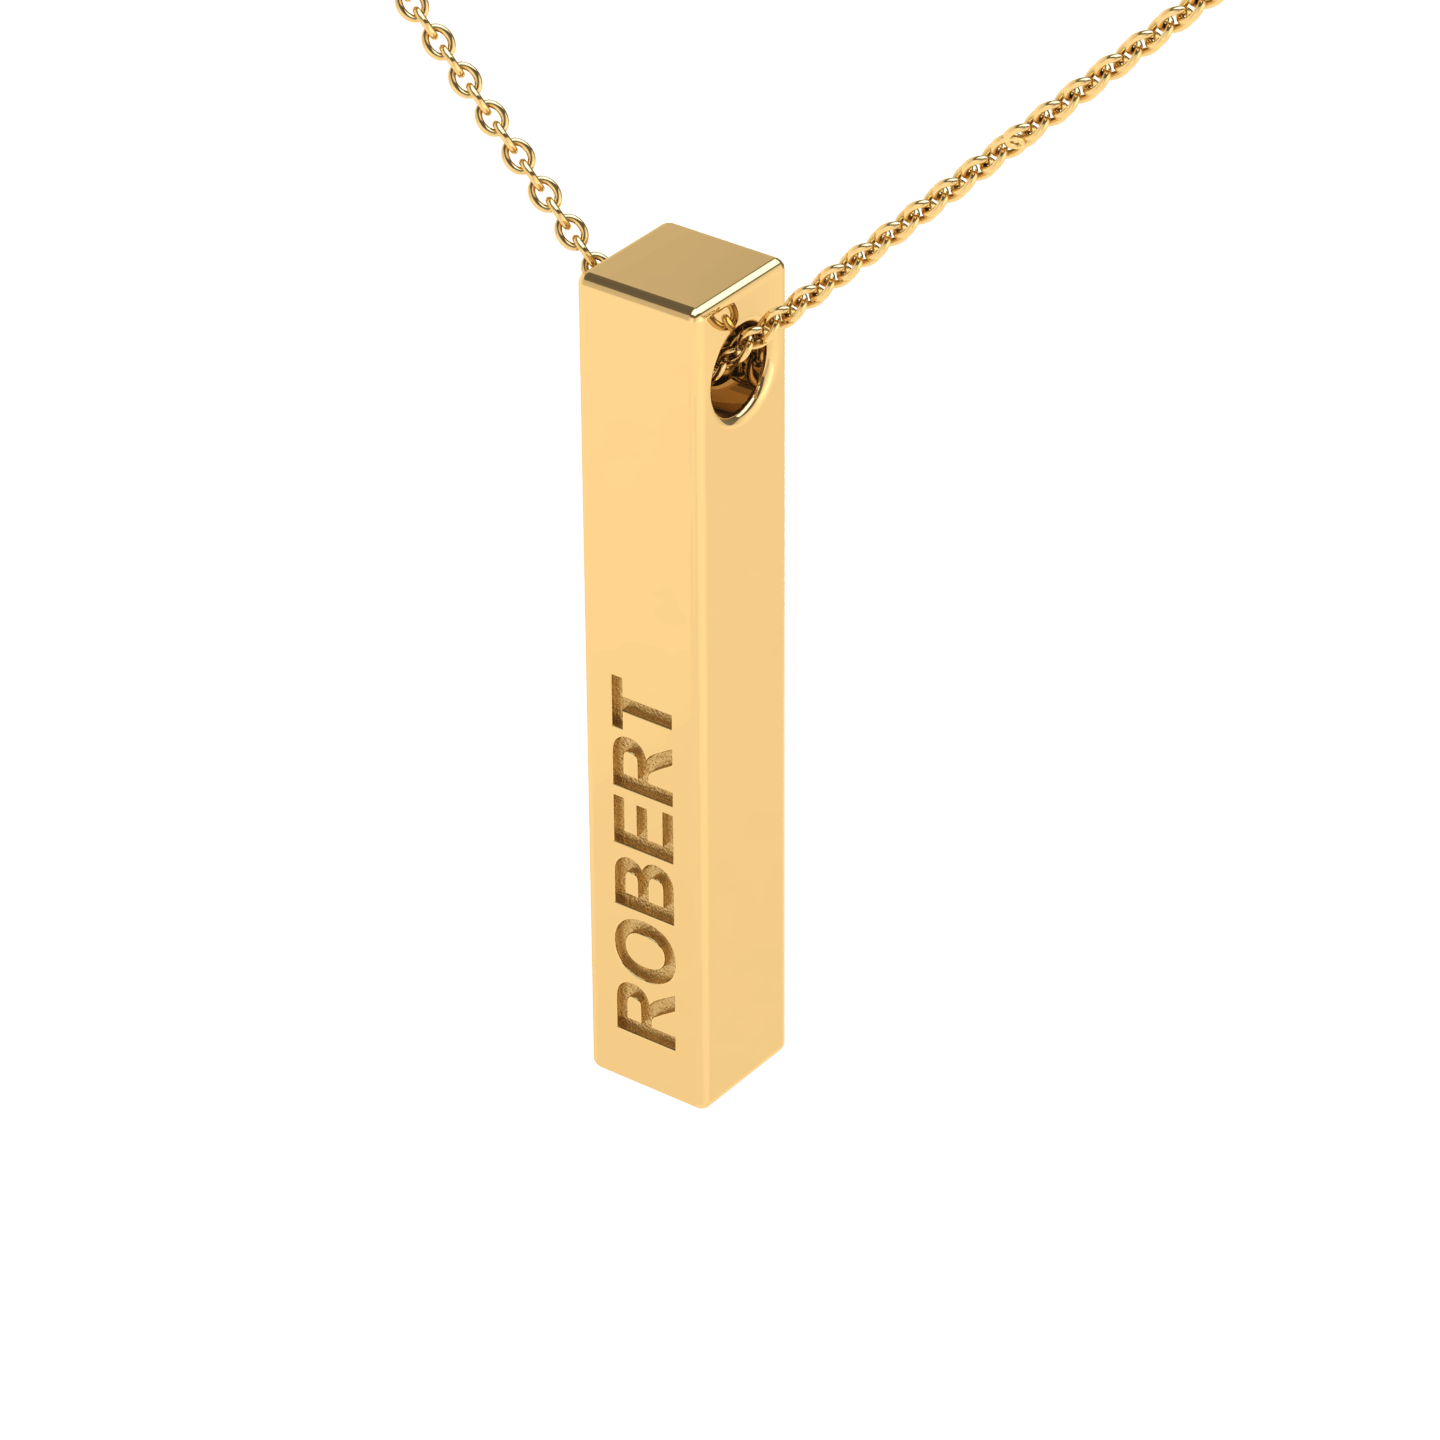 gold bar necklace with name engraving